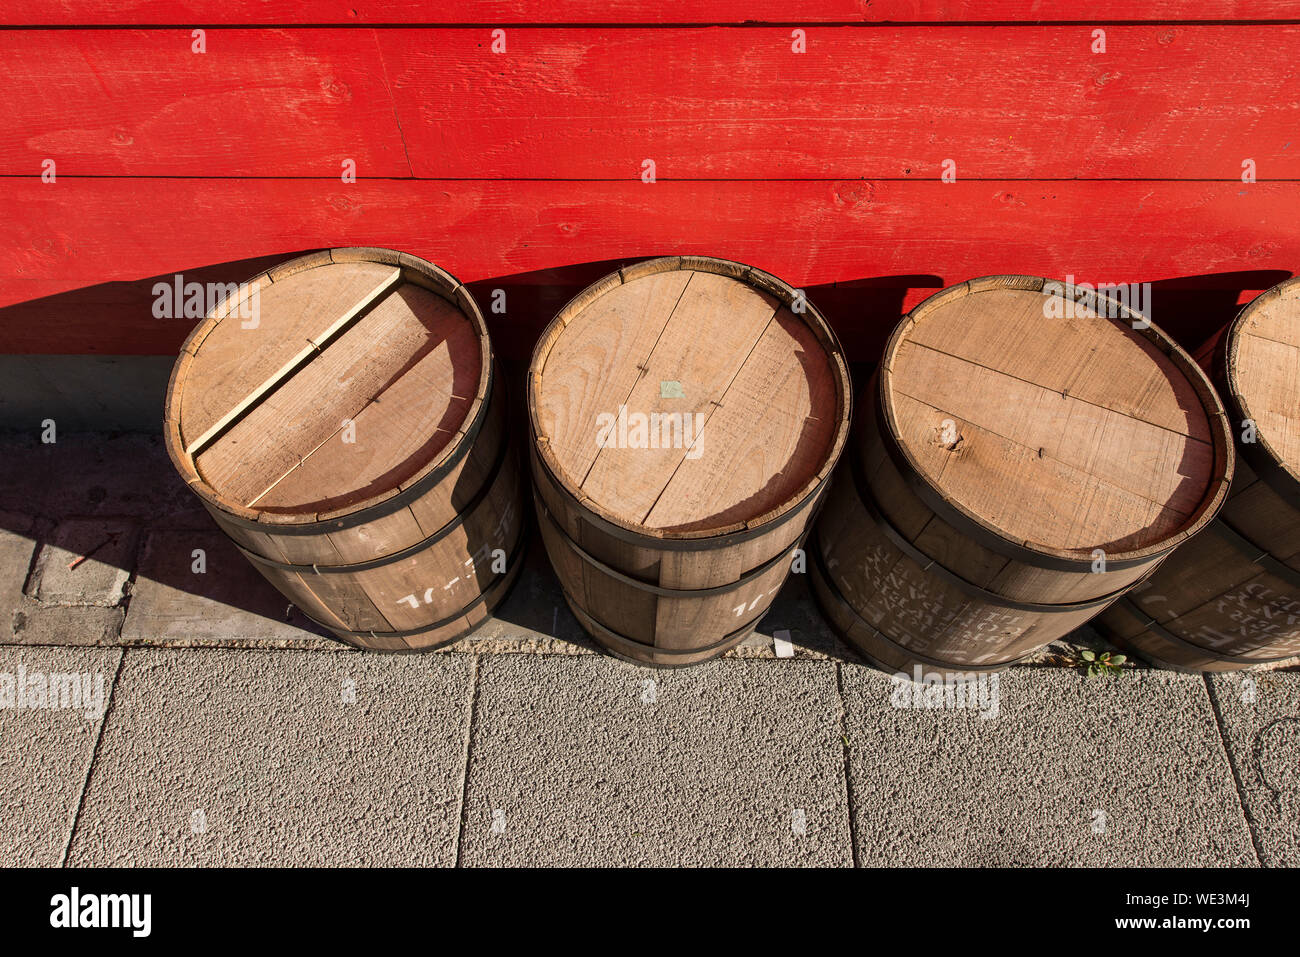 High Angle View Of Wooden Barrels On Footpath By Red Wall Stock Photo